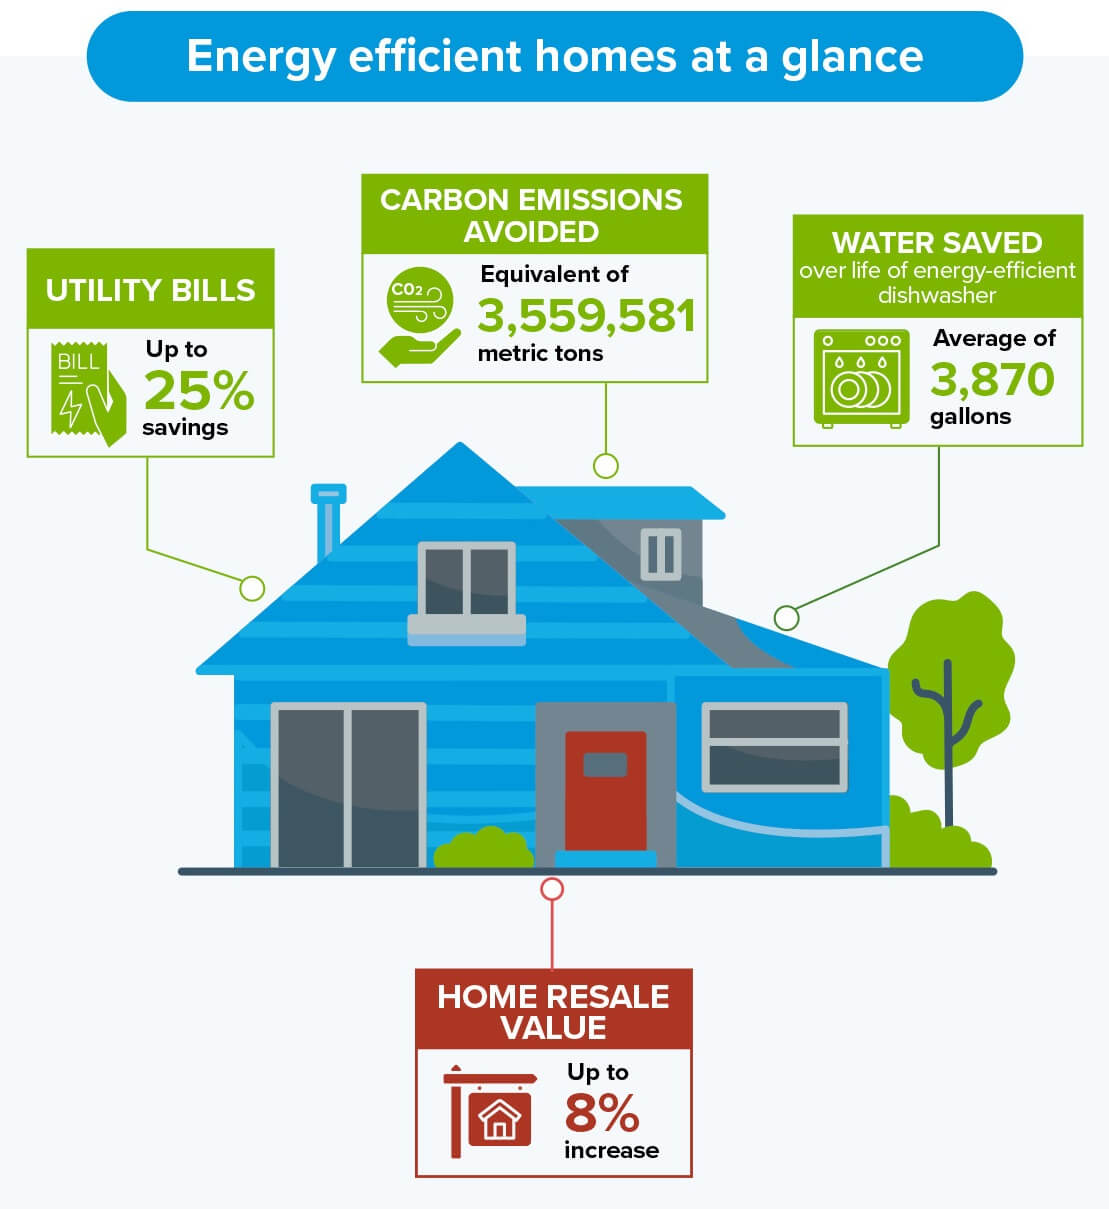 Energy efficient homes at a glance - potential savings